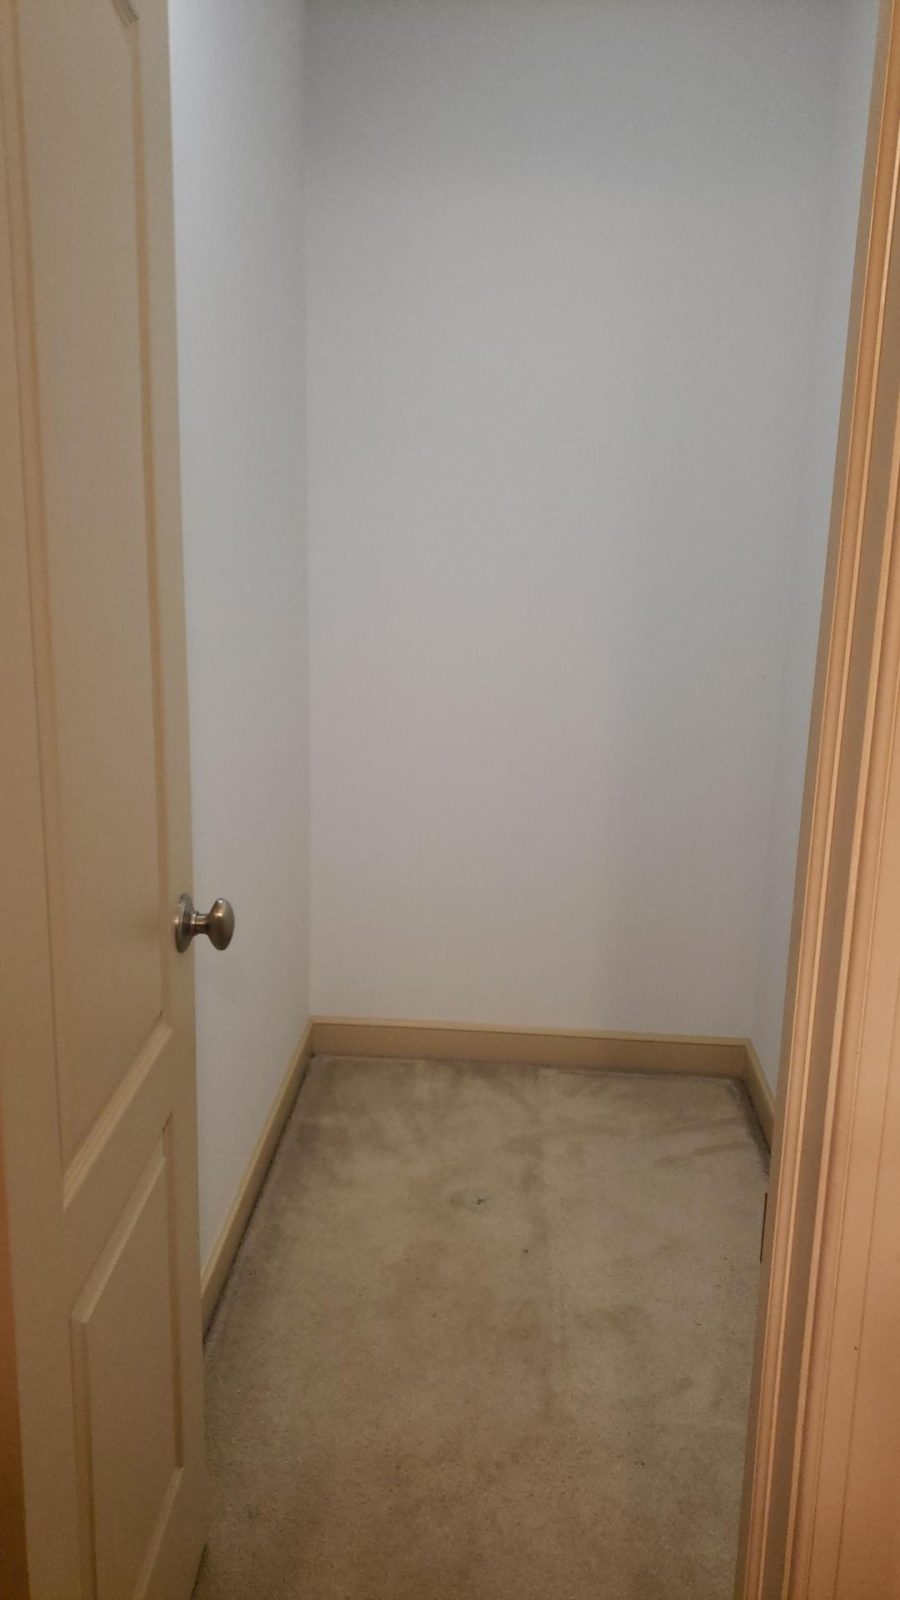 Closet with white walls and tan doors in Easton, PA, after completed residential interior painting project by CertaPro Painters of the Greater Lehigh Valley